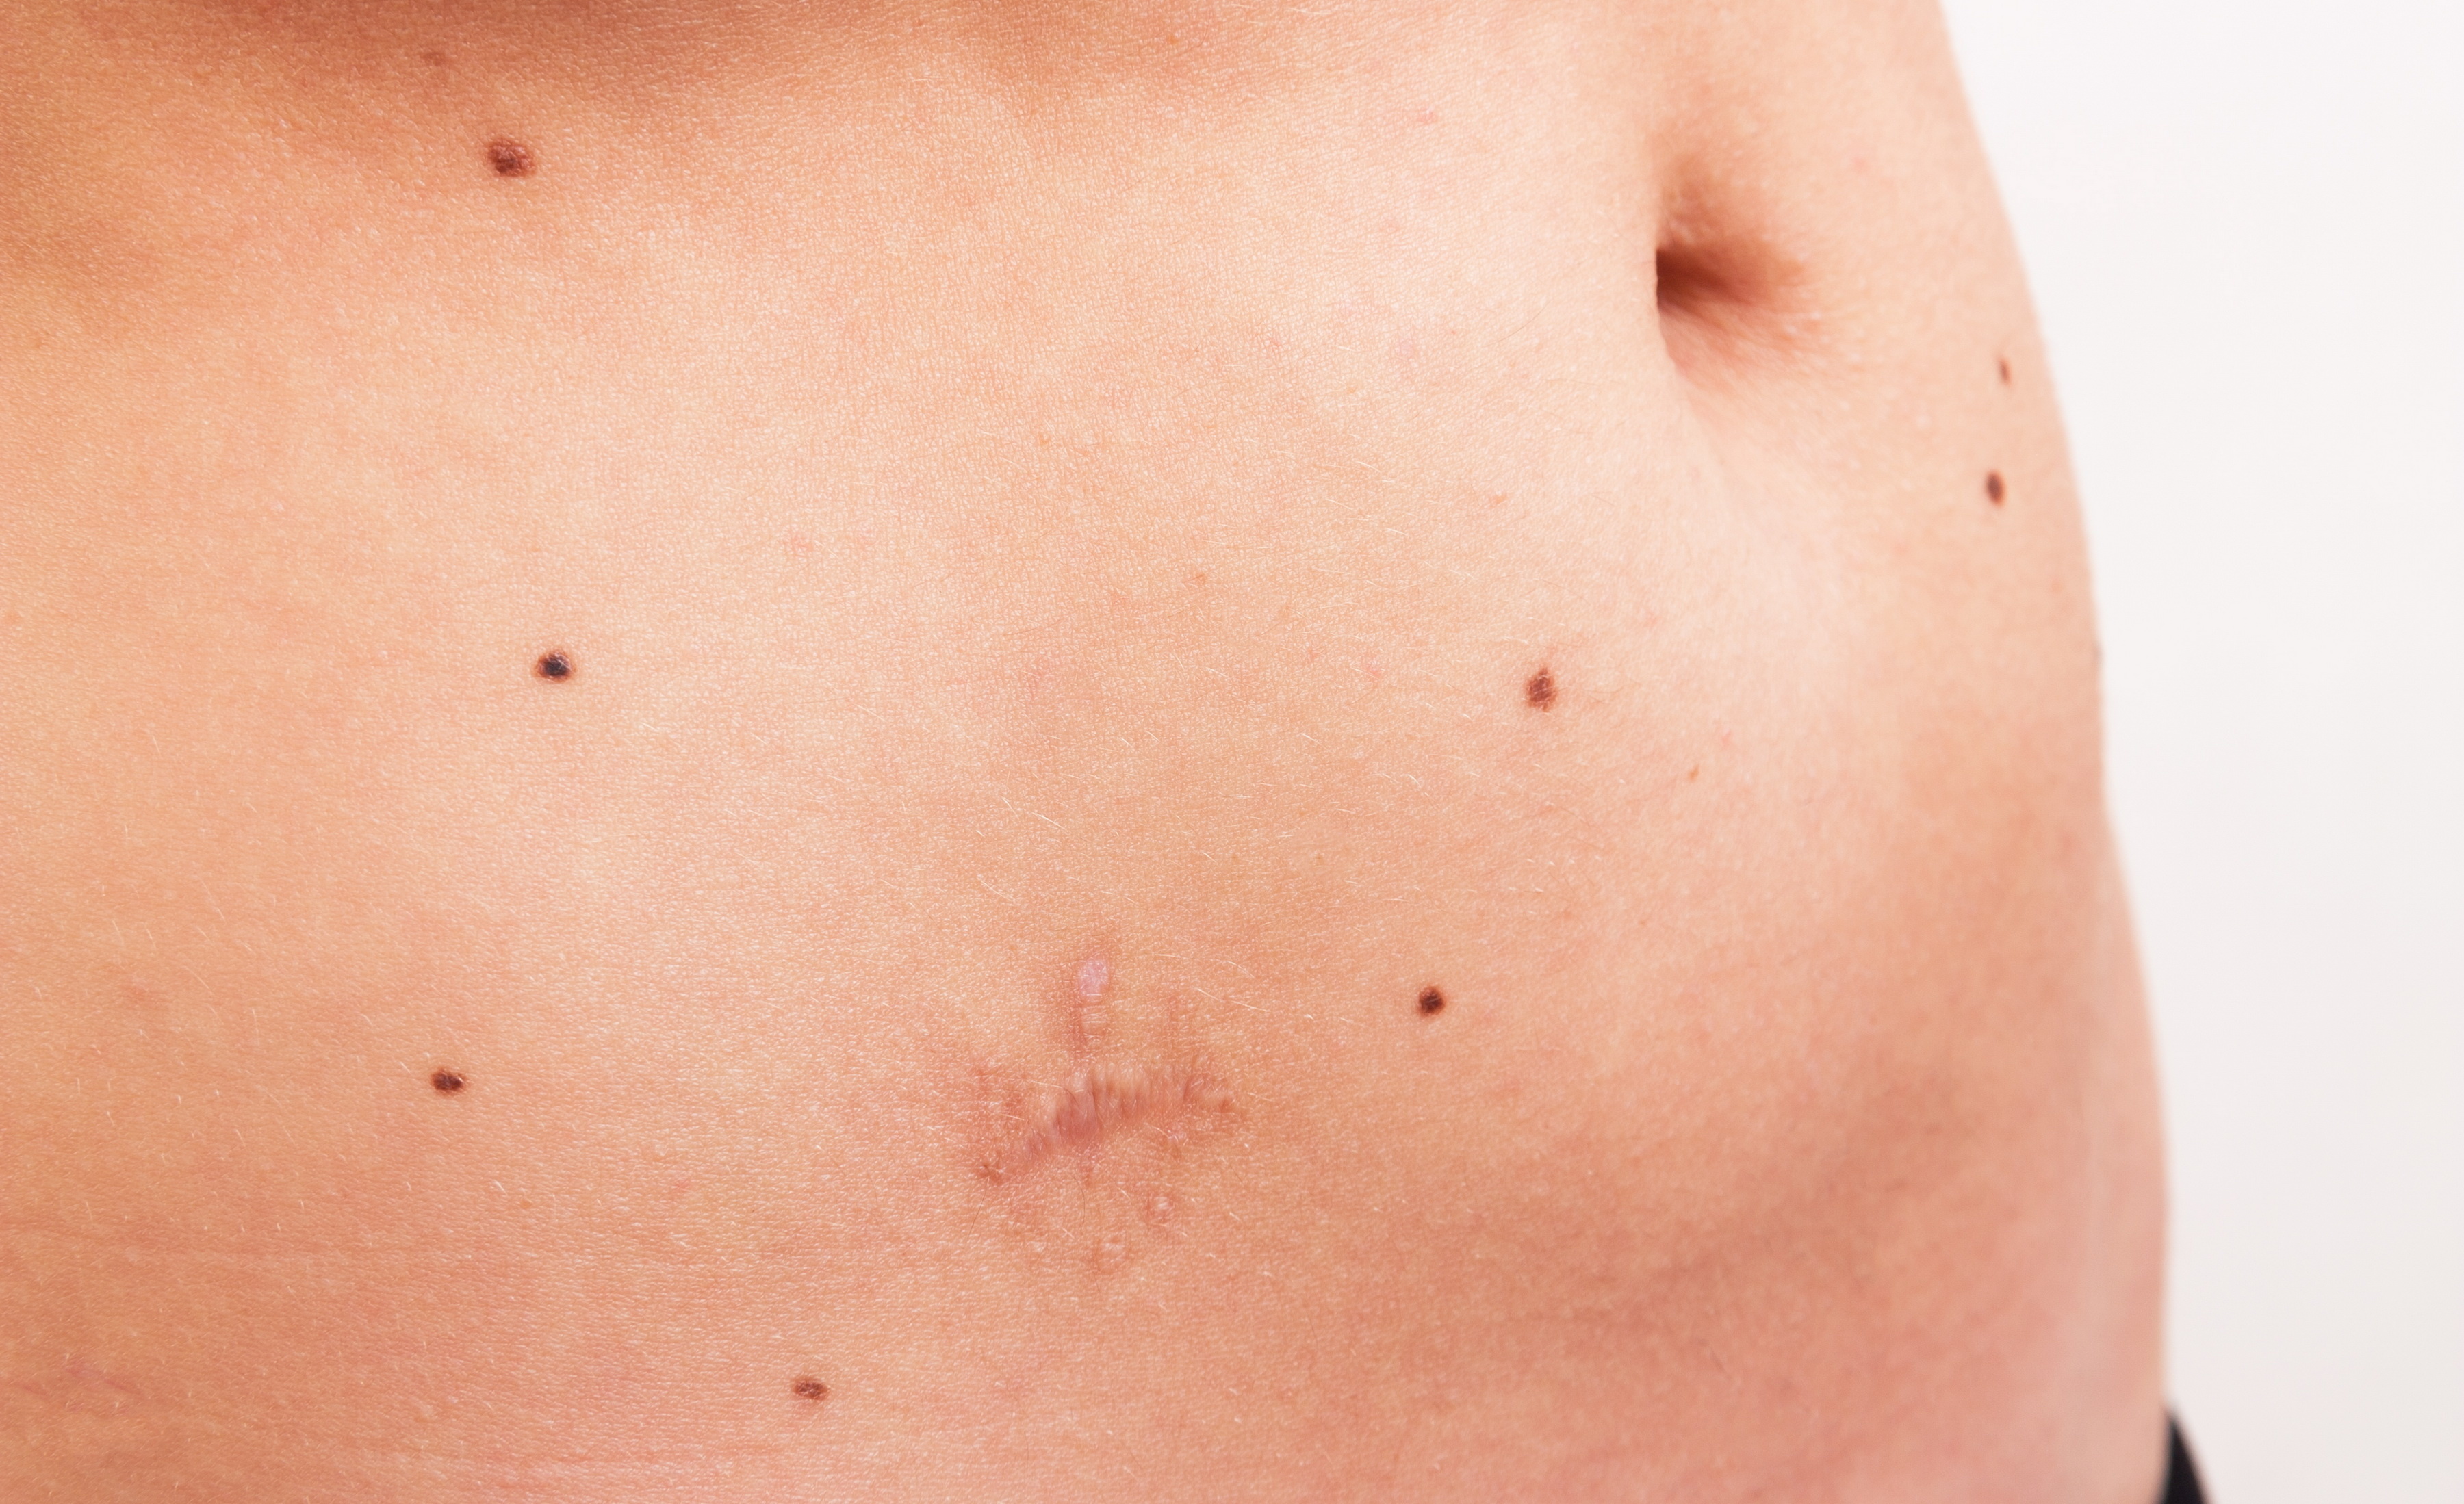 Mole Removal Scar Prevention   Minimizing Scarring After Mole Removal